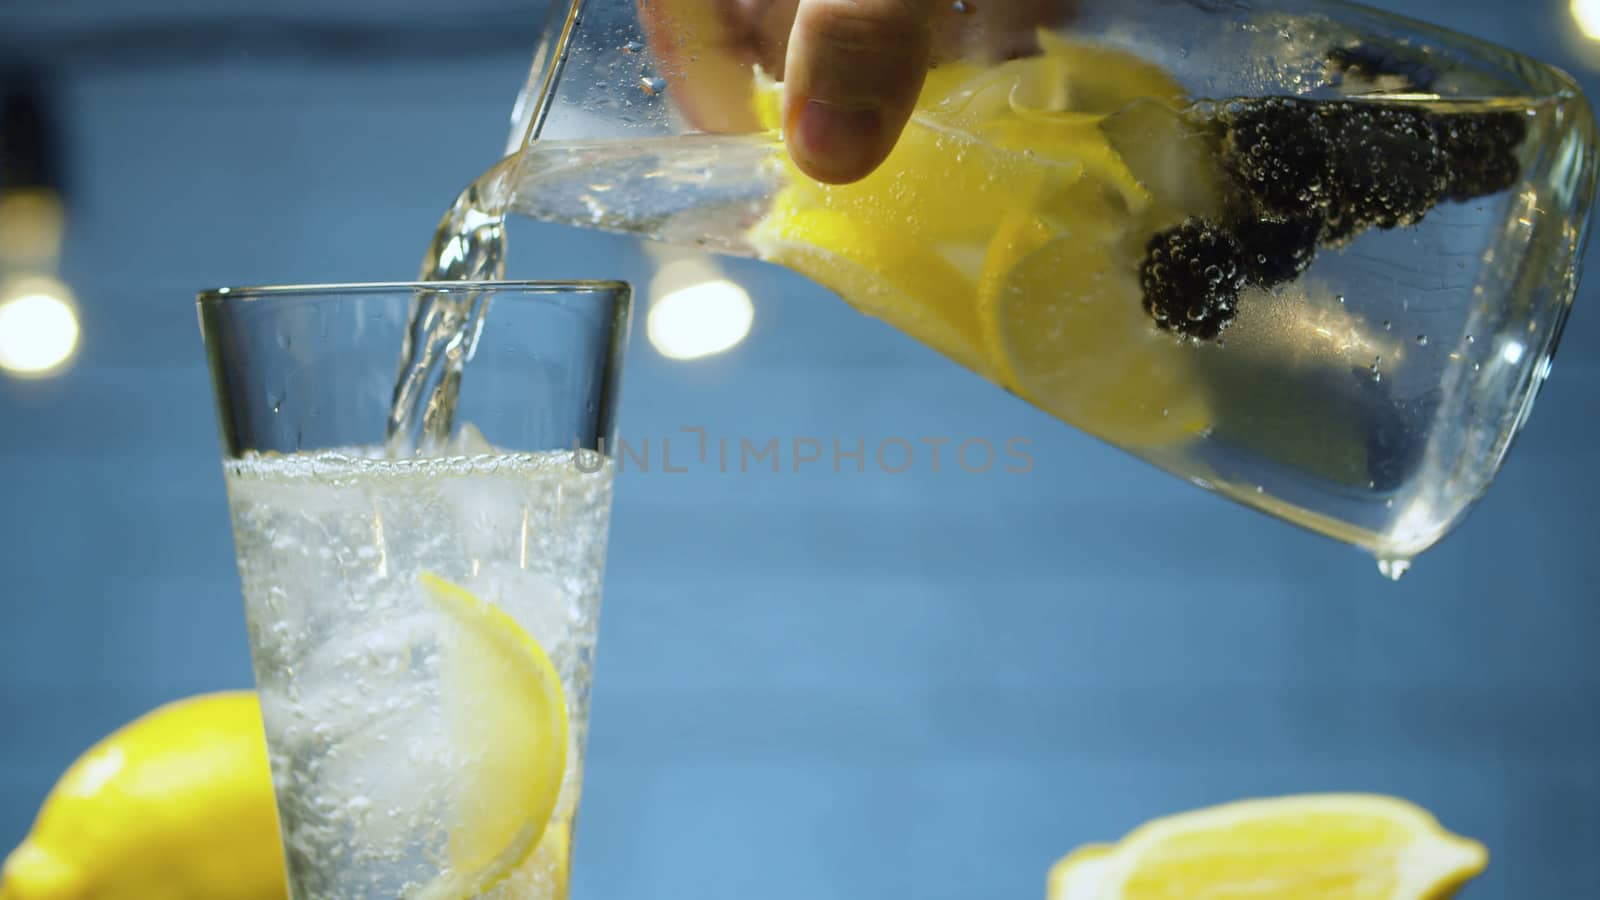 Extreme close up pouring lemonade with dewberry and lemon into a glass. Blurry lamps on blue background